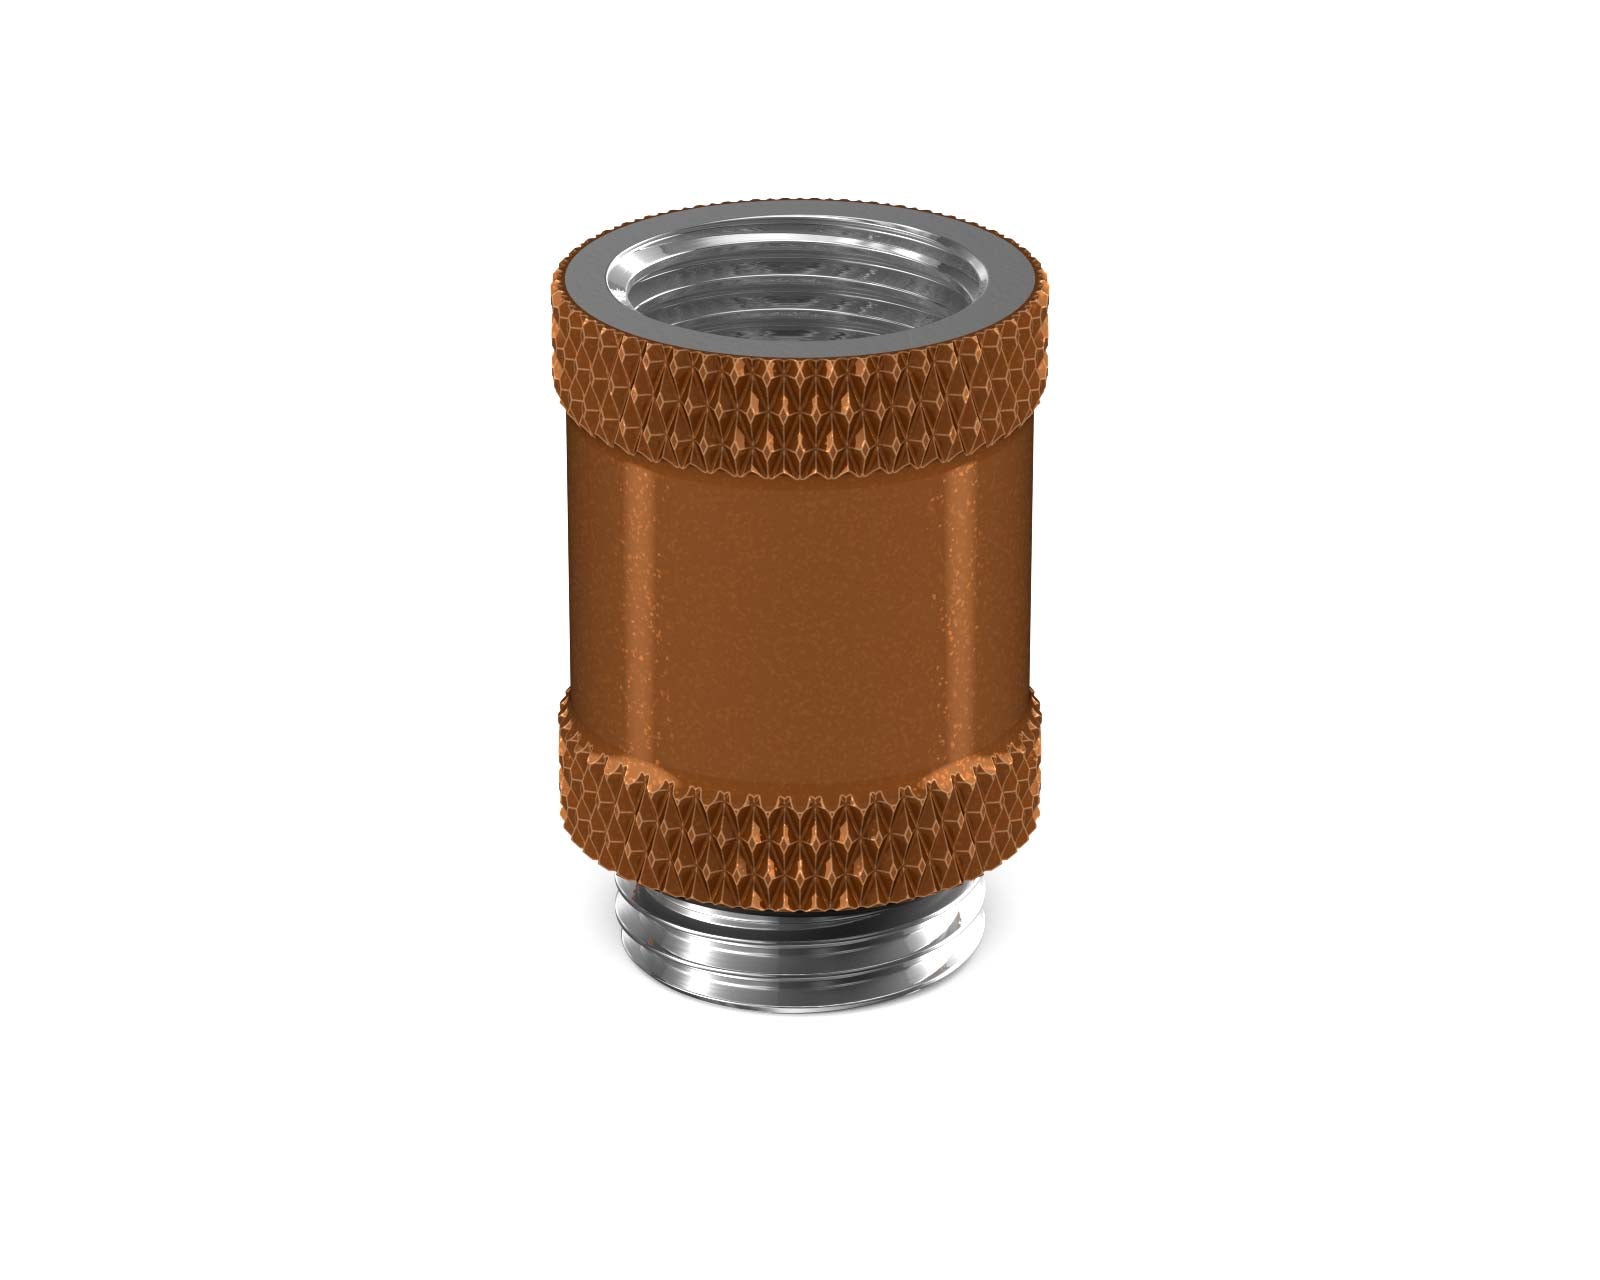 PrimoChill Male to Female G 1/4in. 20mm SX Extension Coupler - PrimoChill - KEEPING IT COOL Copper